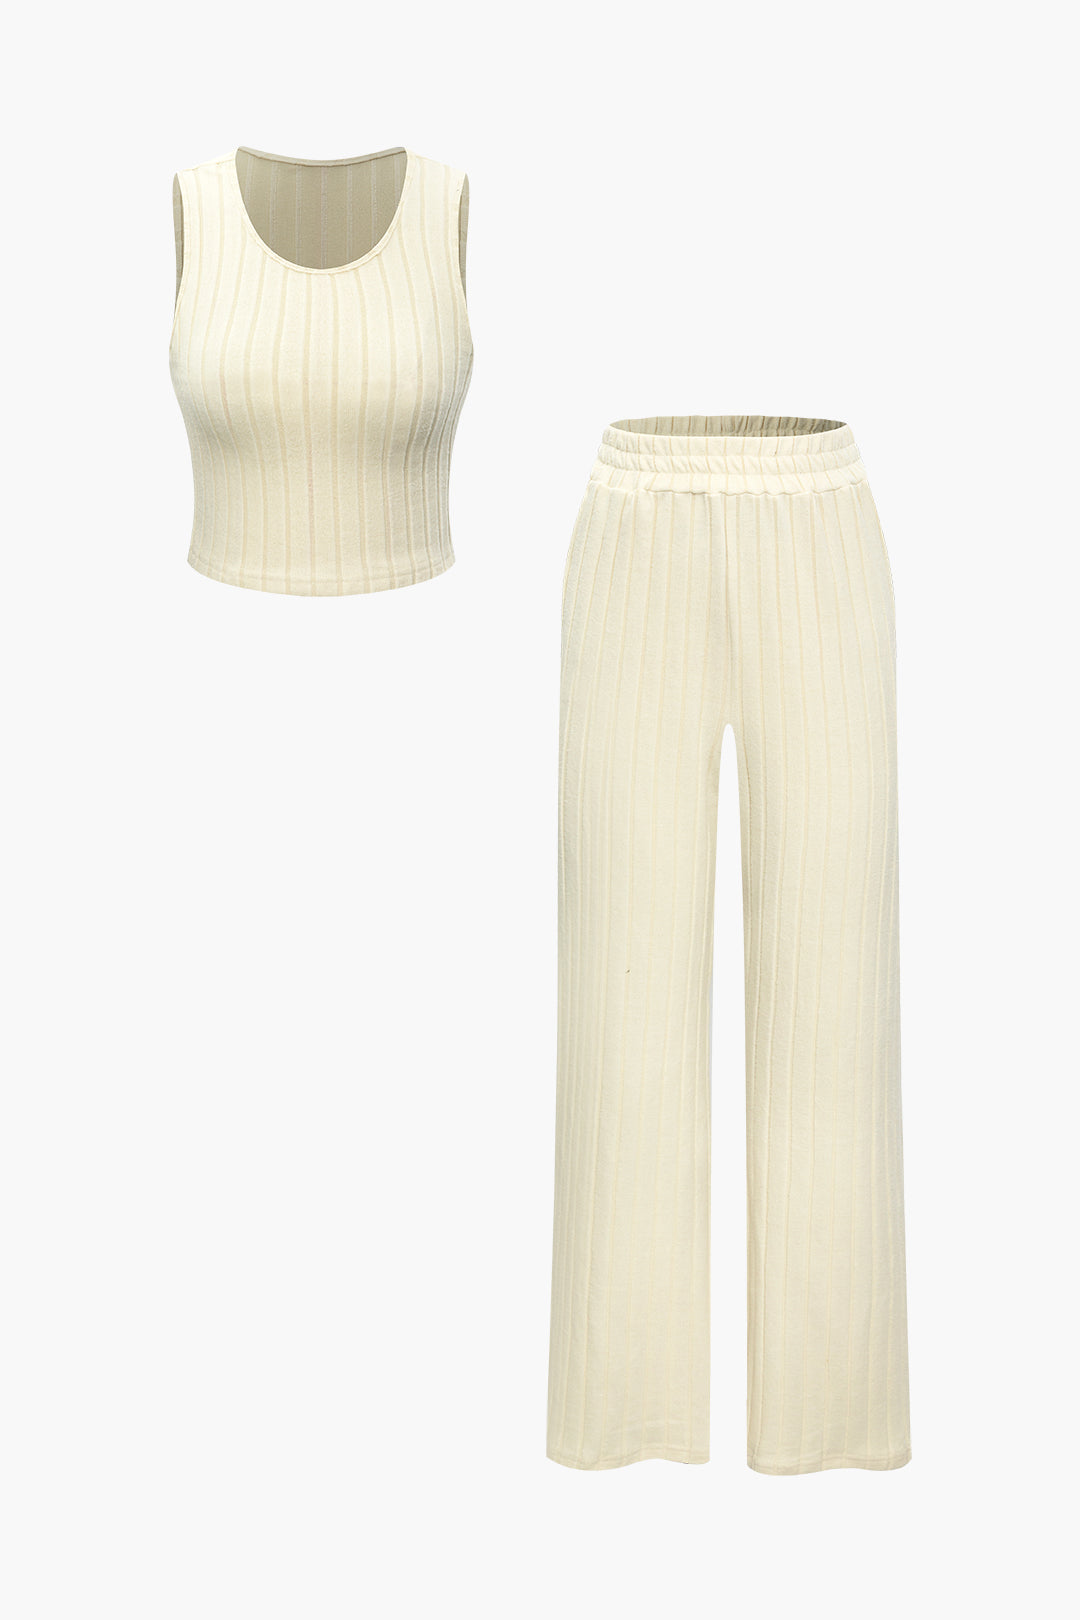 Solid Knit Tank Top And High Waist Pants Set